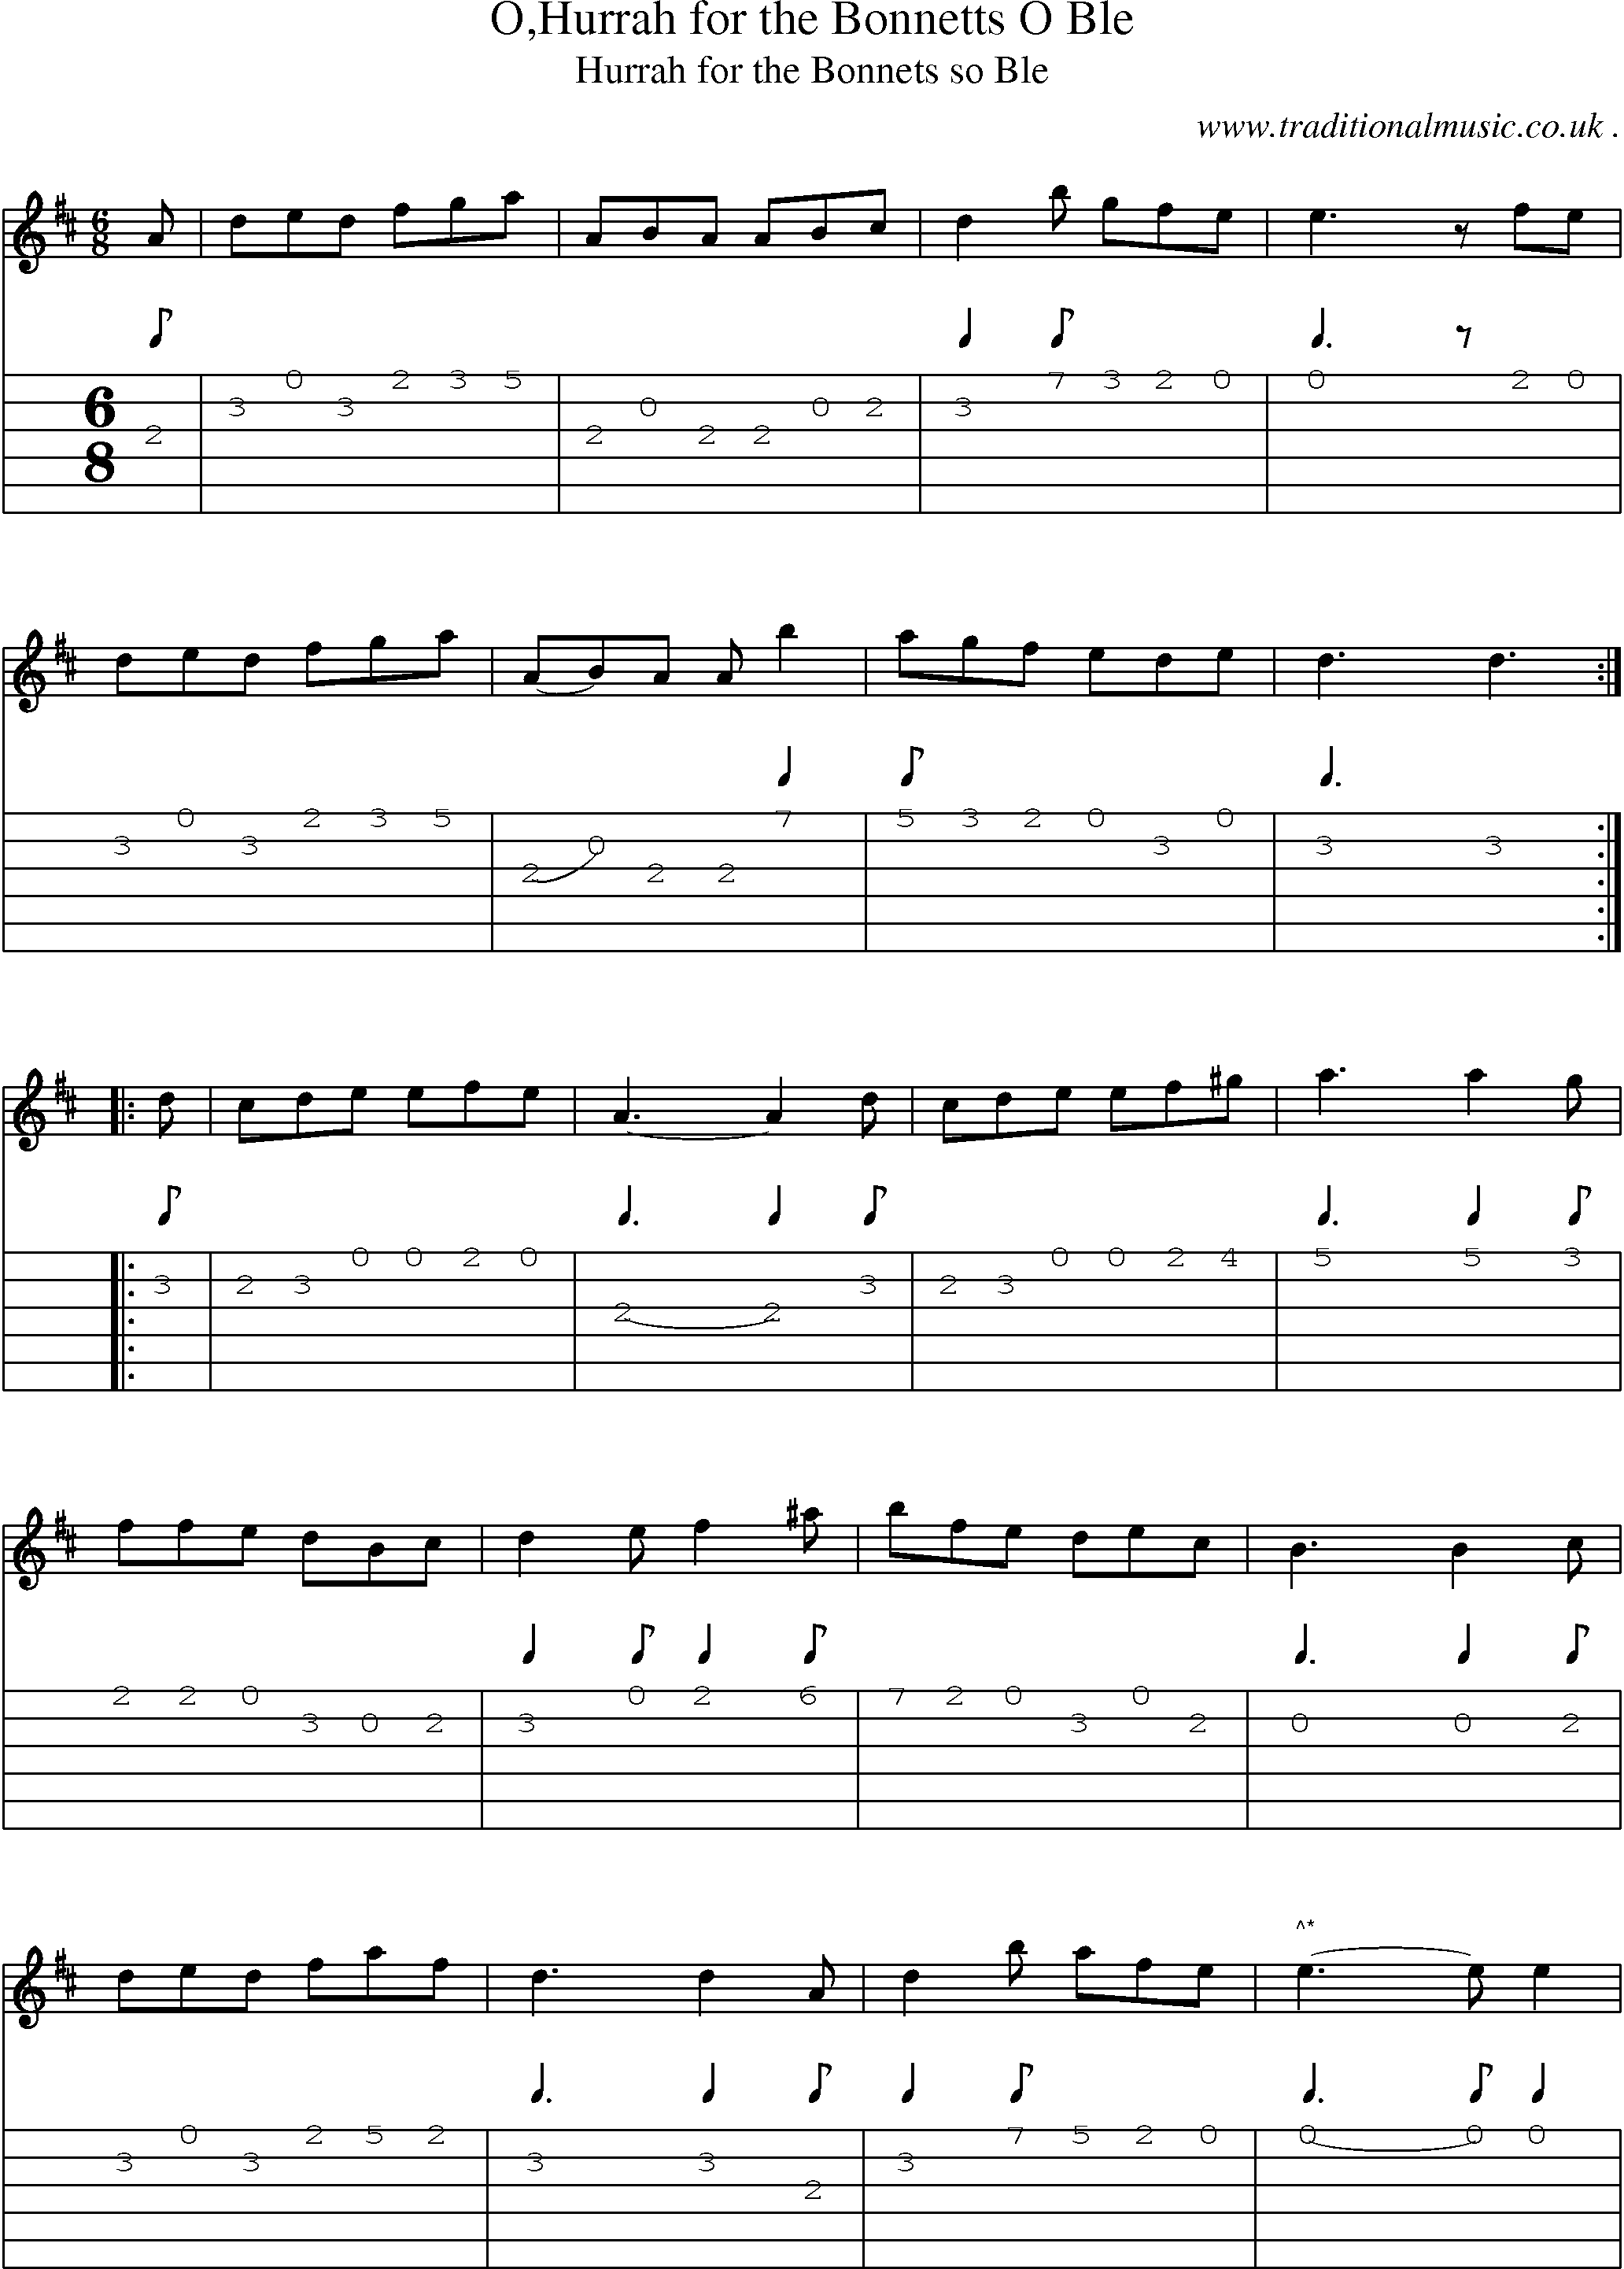 Sheet-Music and Guitar Tabs for Ohurrah For The Bonnetts O Ble